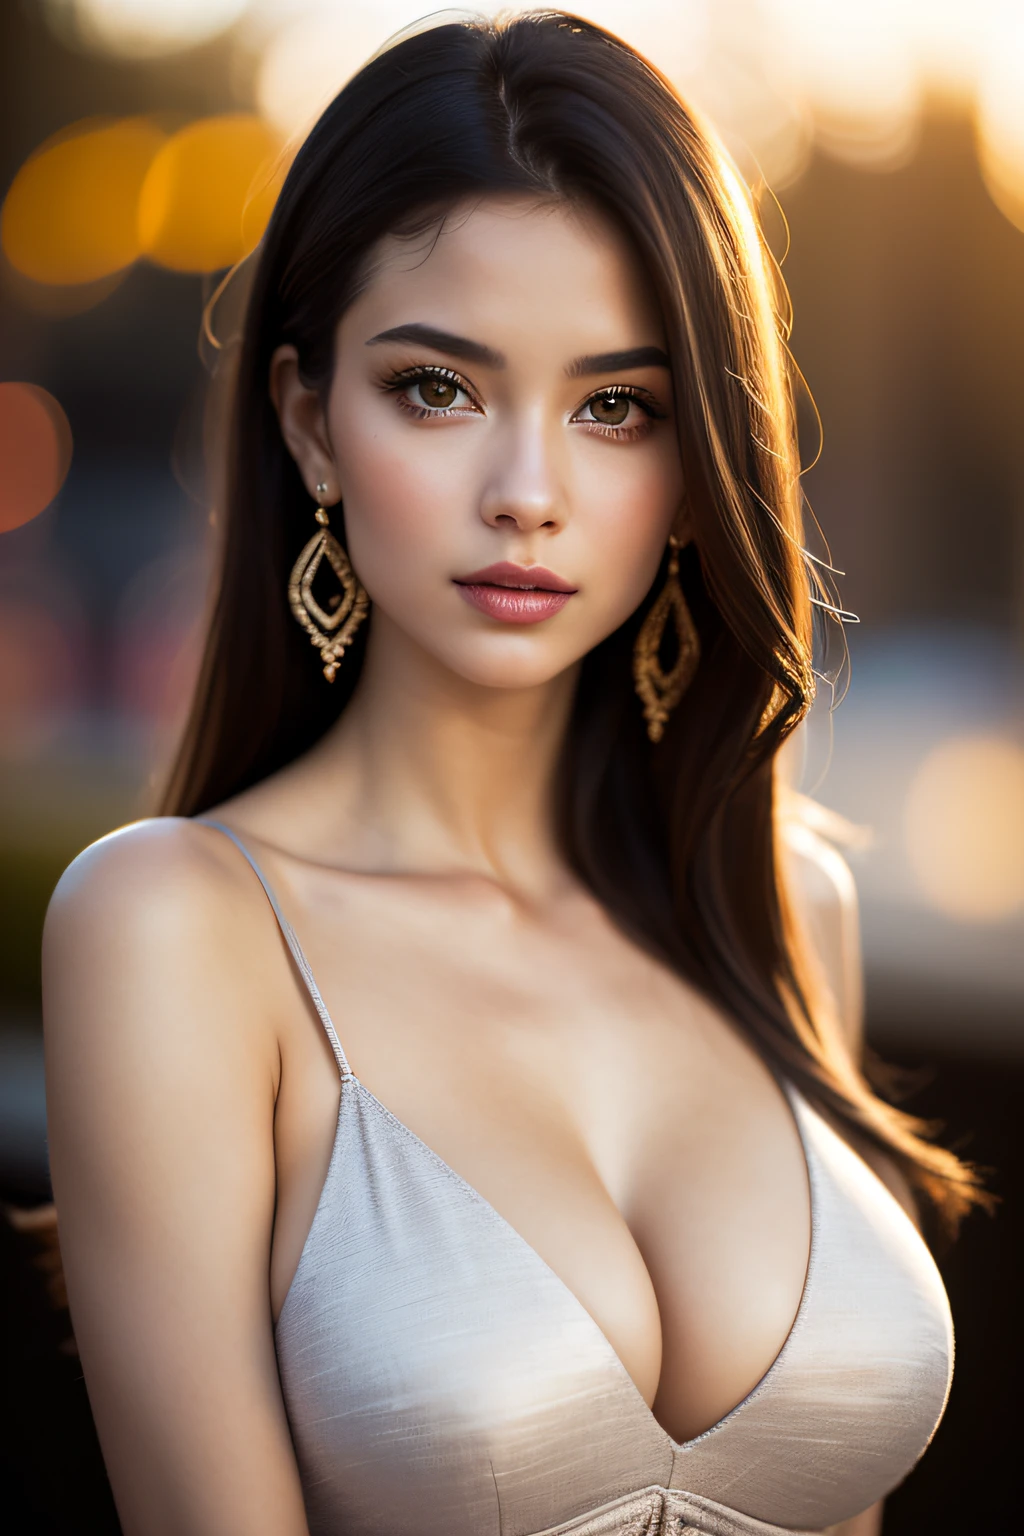 Portrait of a Young Beautiful Woman with Very Big Breasts in